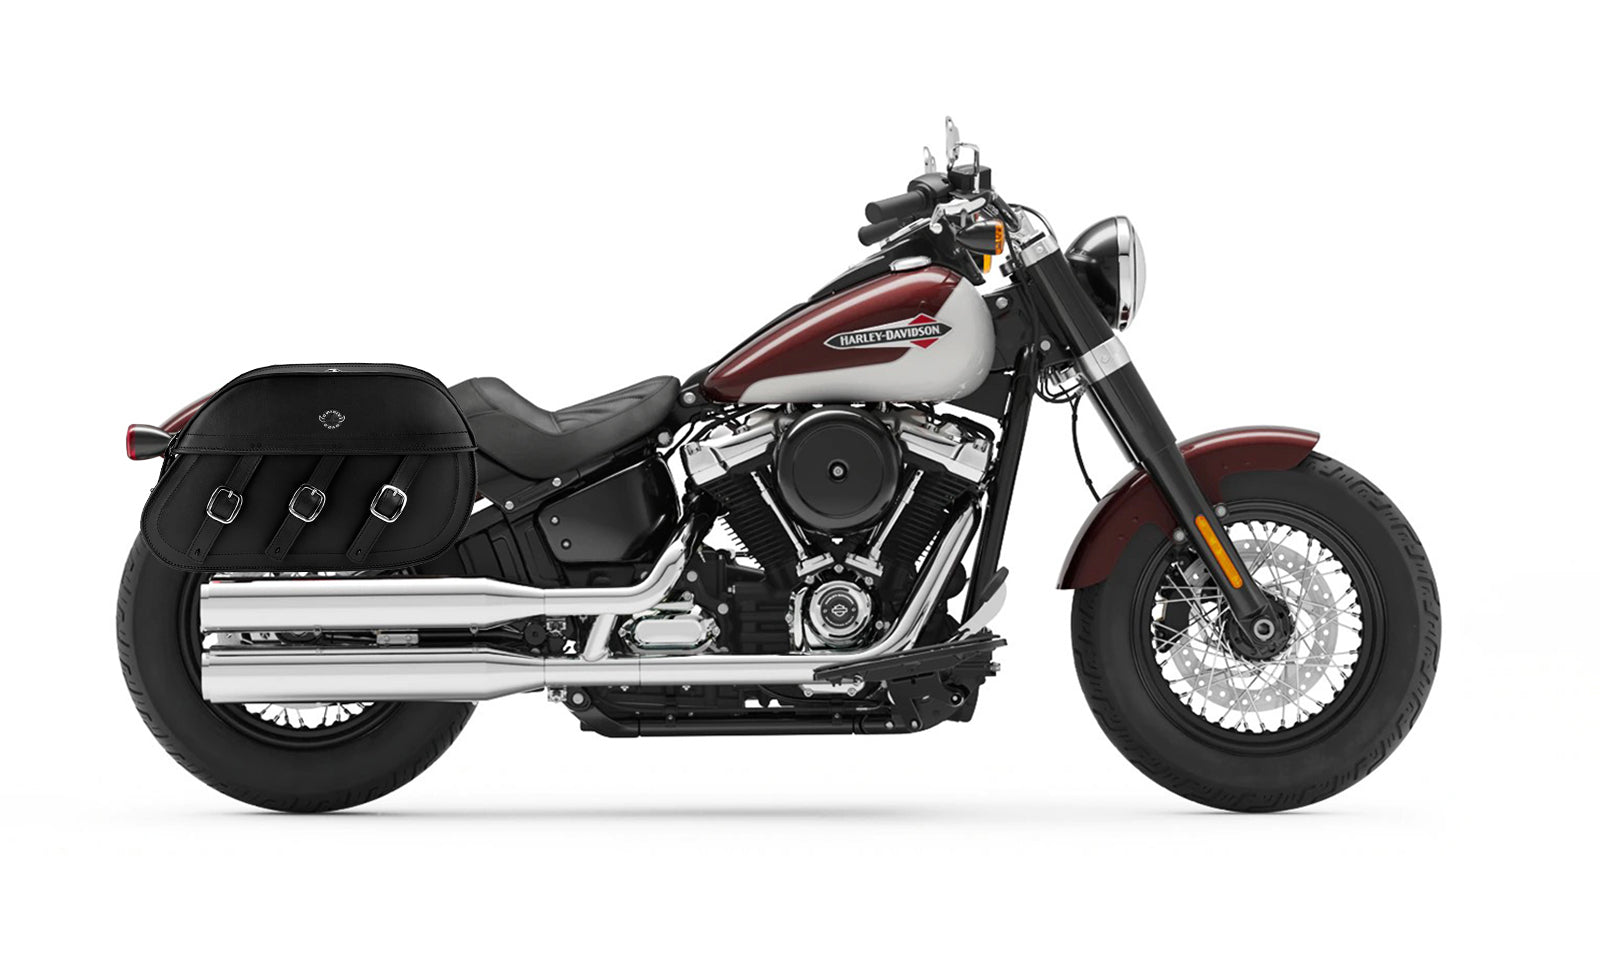 34L - Trianon Extra Large Leather Saddlebags for Harley Softail Slim FLSL on Bike Photo @expand